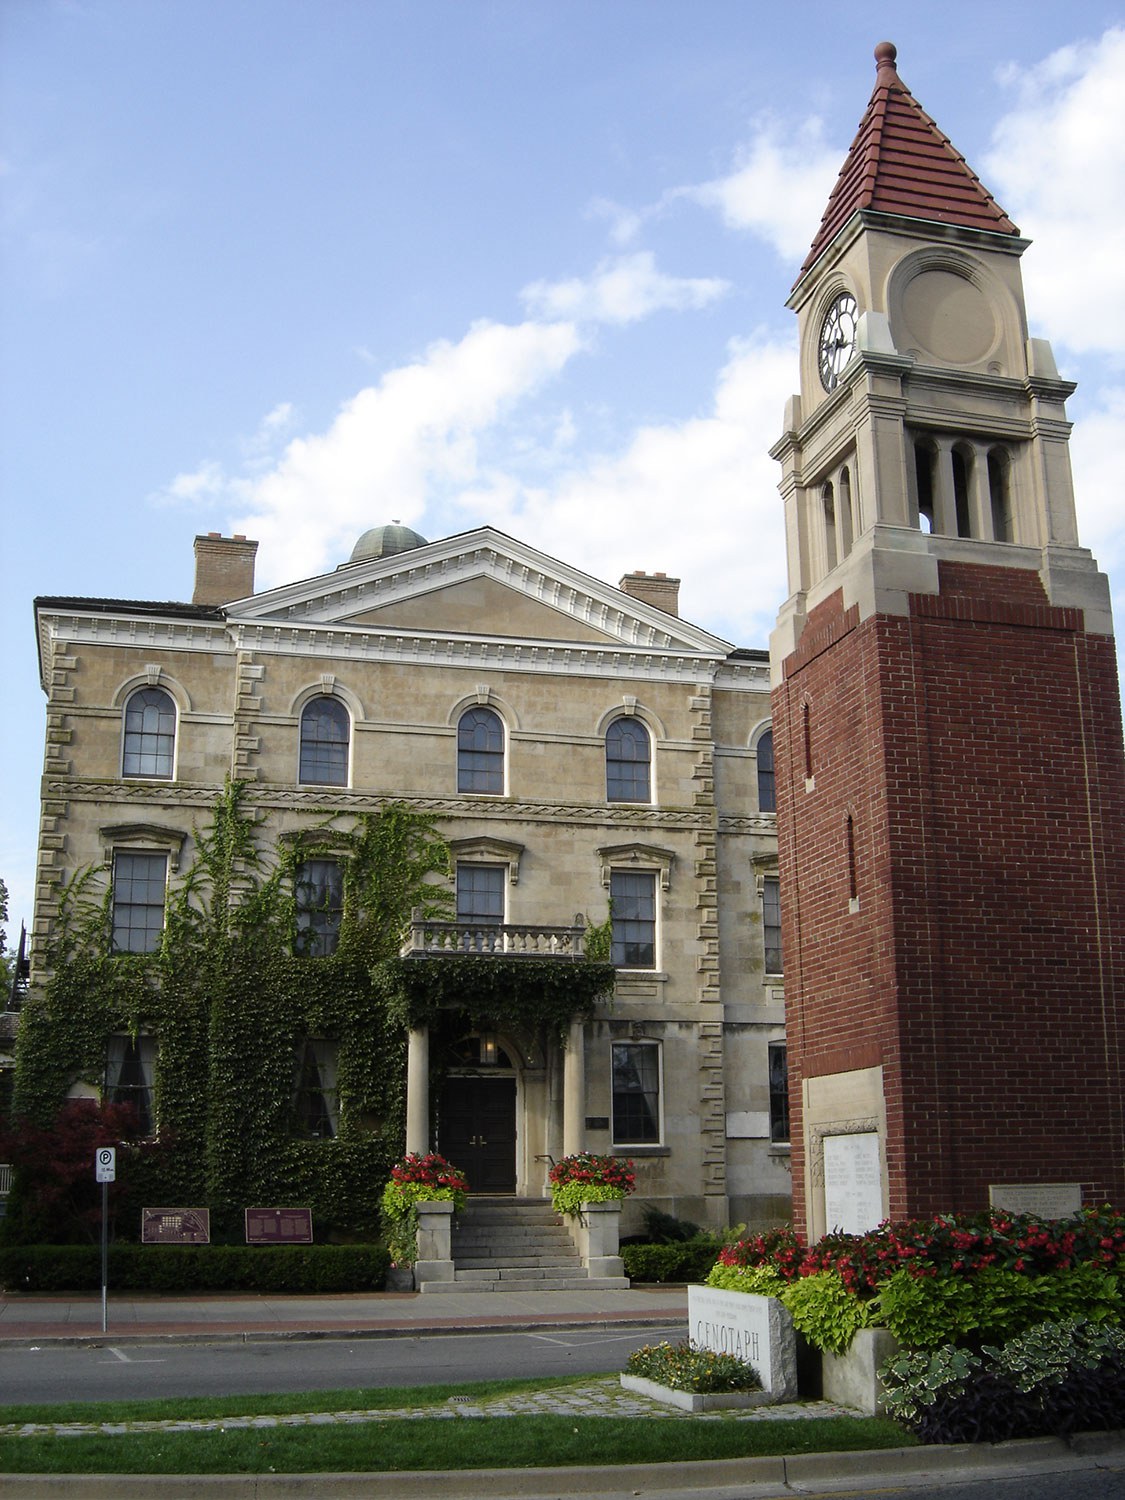 Downtown Niagara-on-the-Lake – a frequently visited heritage conservation district.